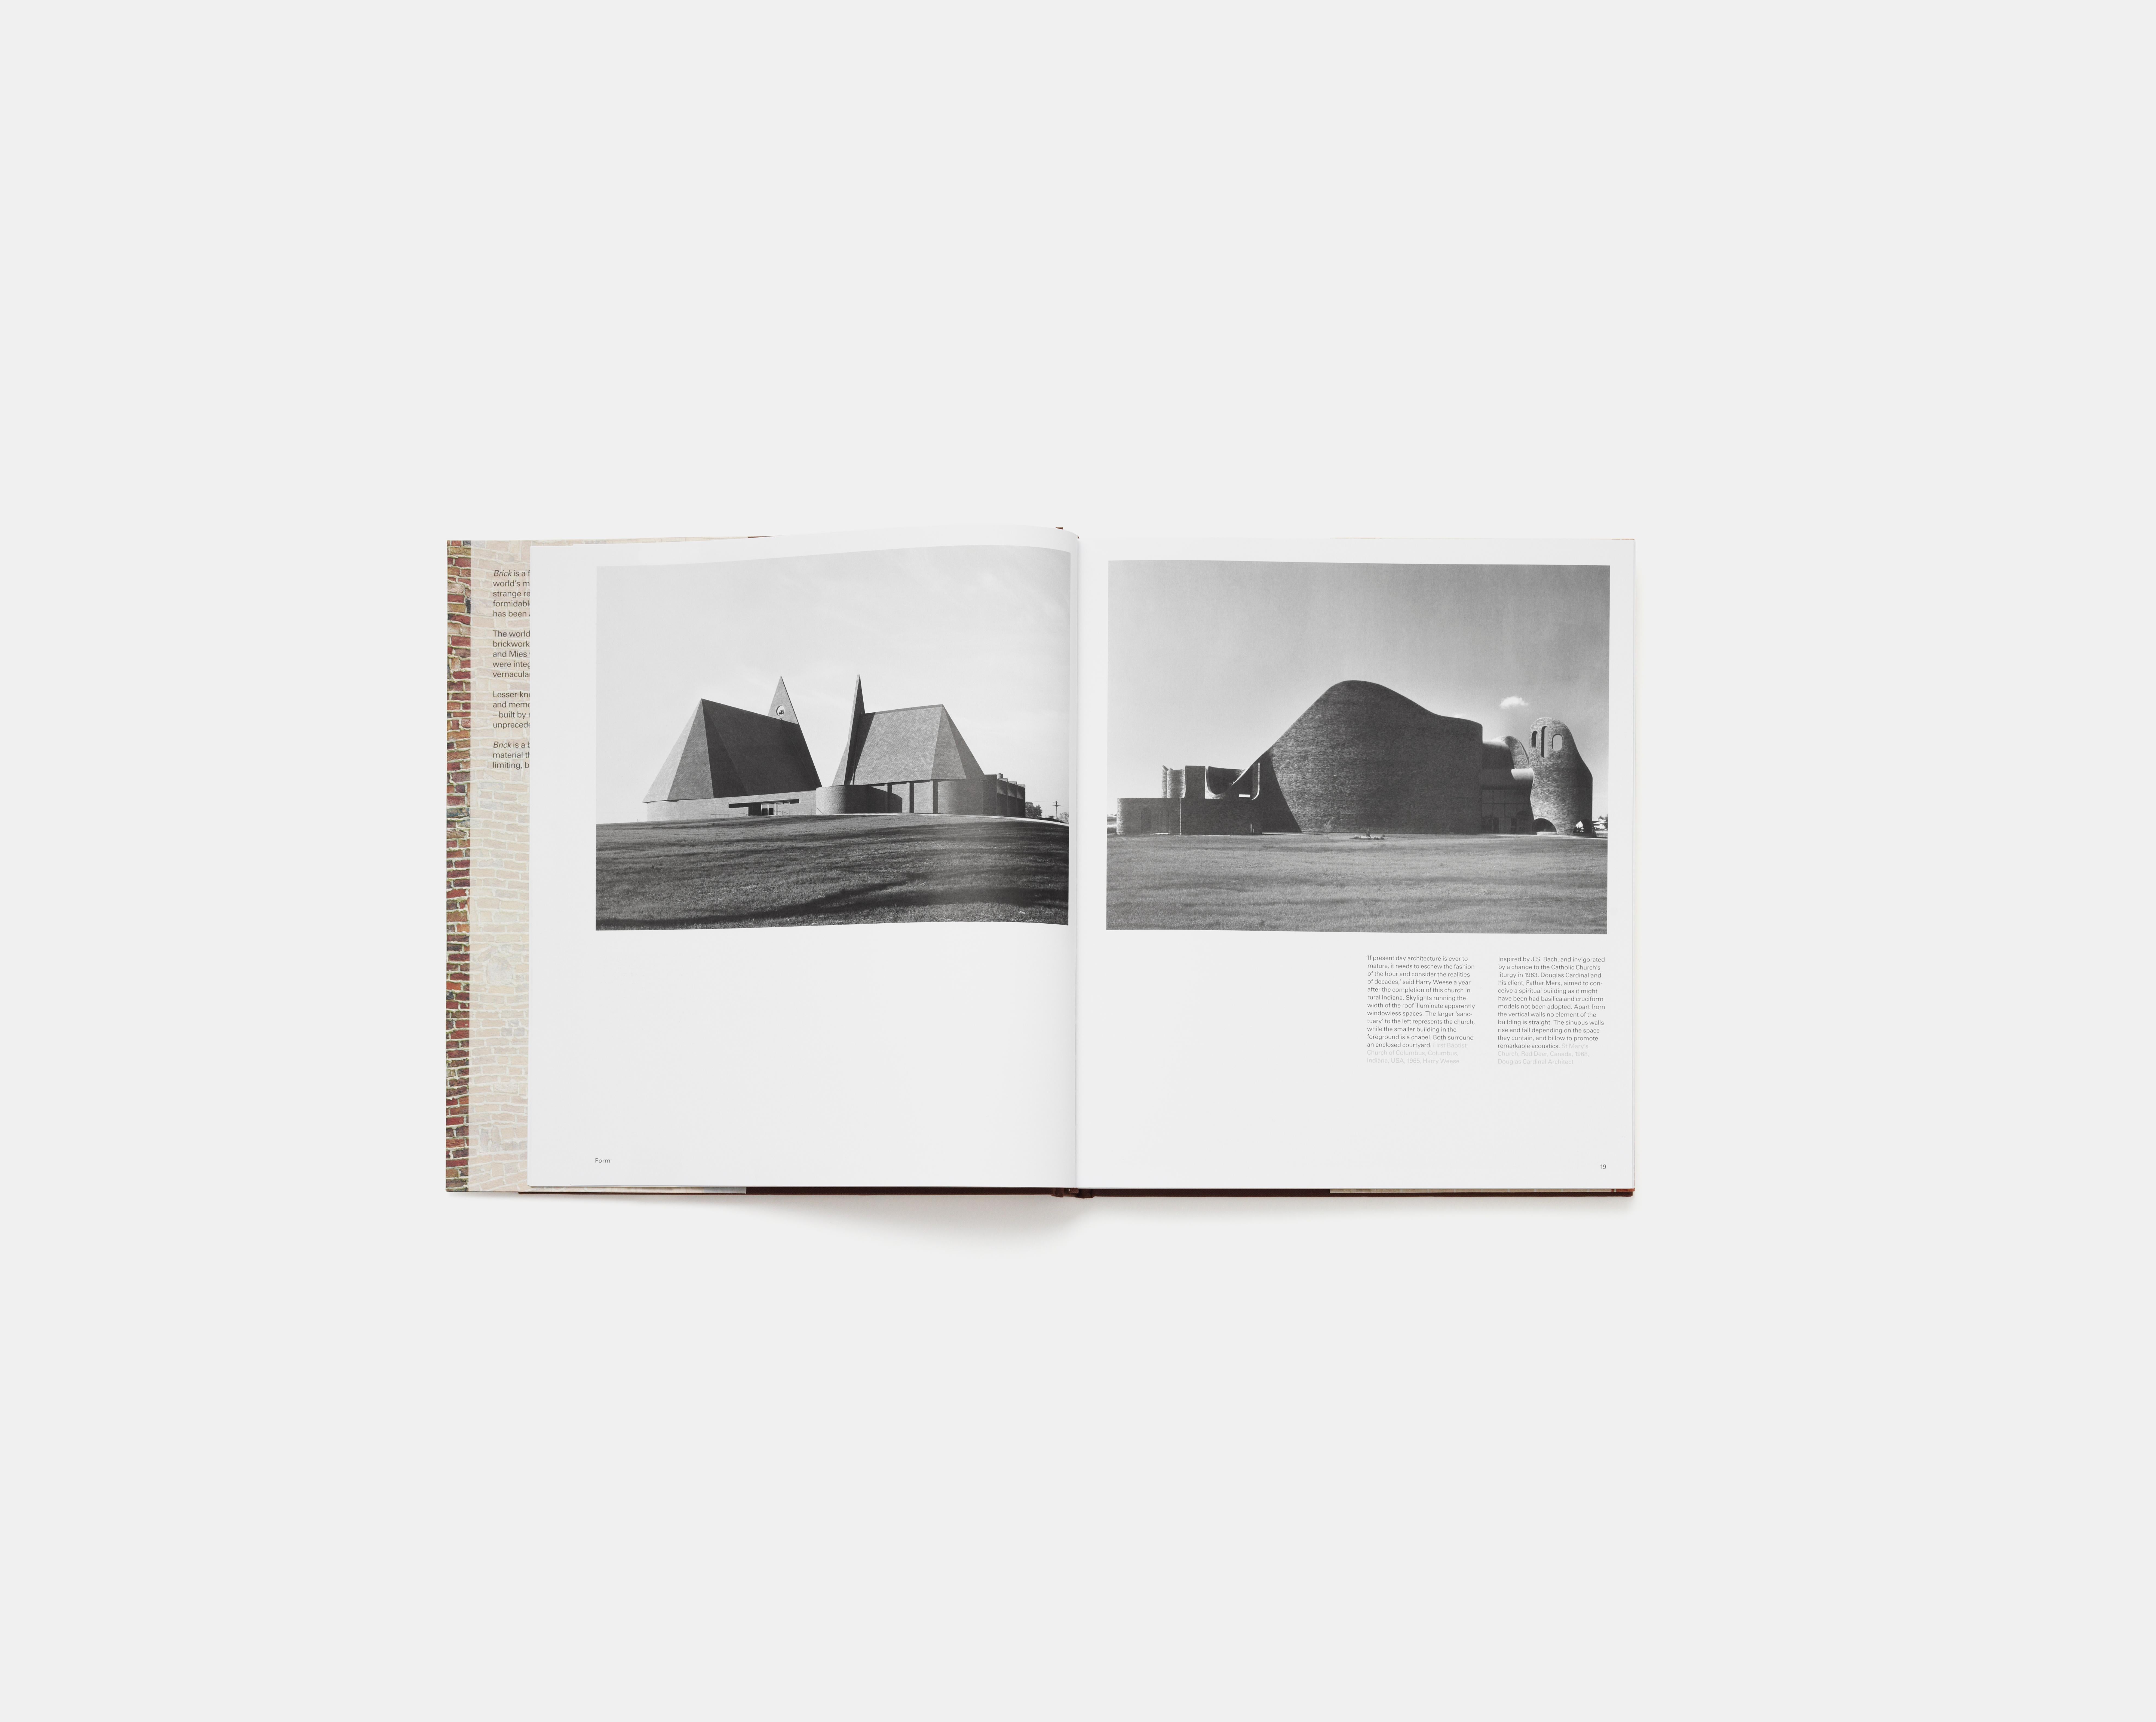 The humble brick has been an architectural staple for centuries, but is rarely celebrated. Brick is a fresh, insightful and surprising look at one of the world’s most familiar and popular building materials. From the strange remains of the Ziggurat